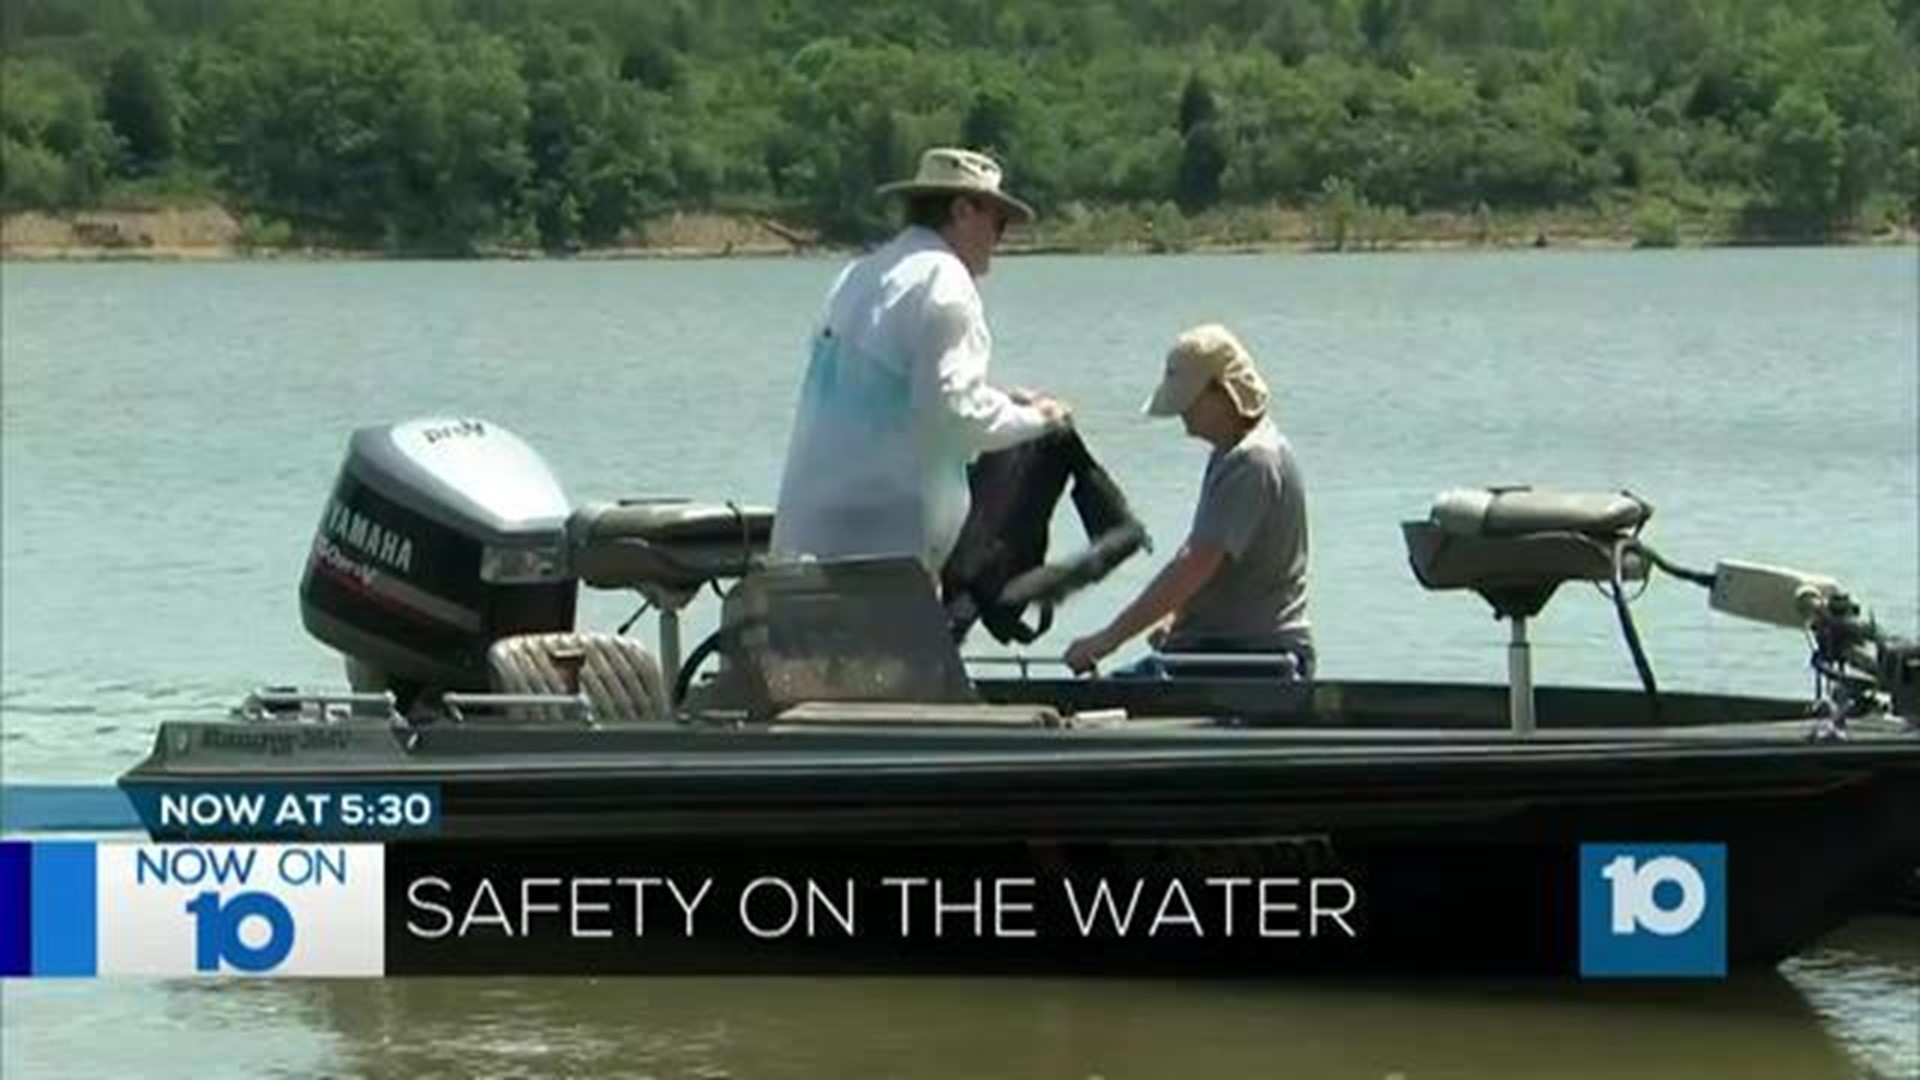 Important tips for keeping safe on the water this summer